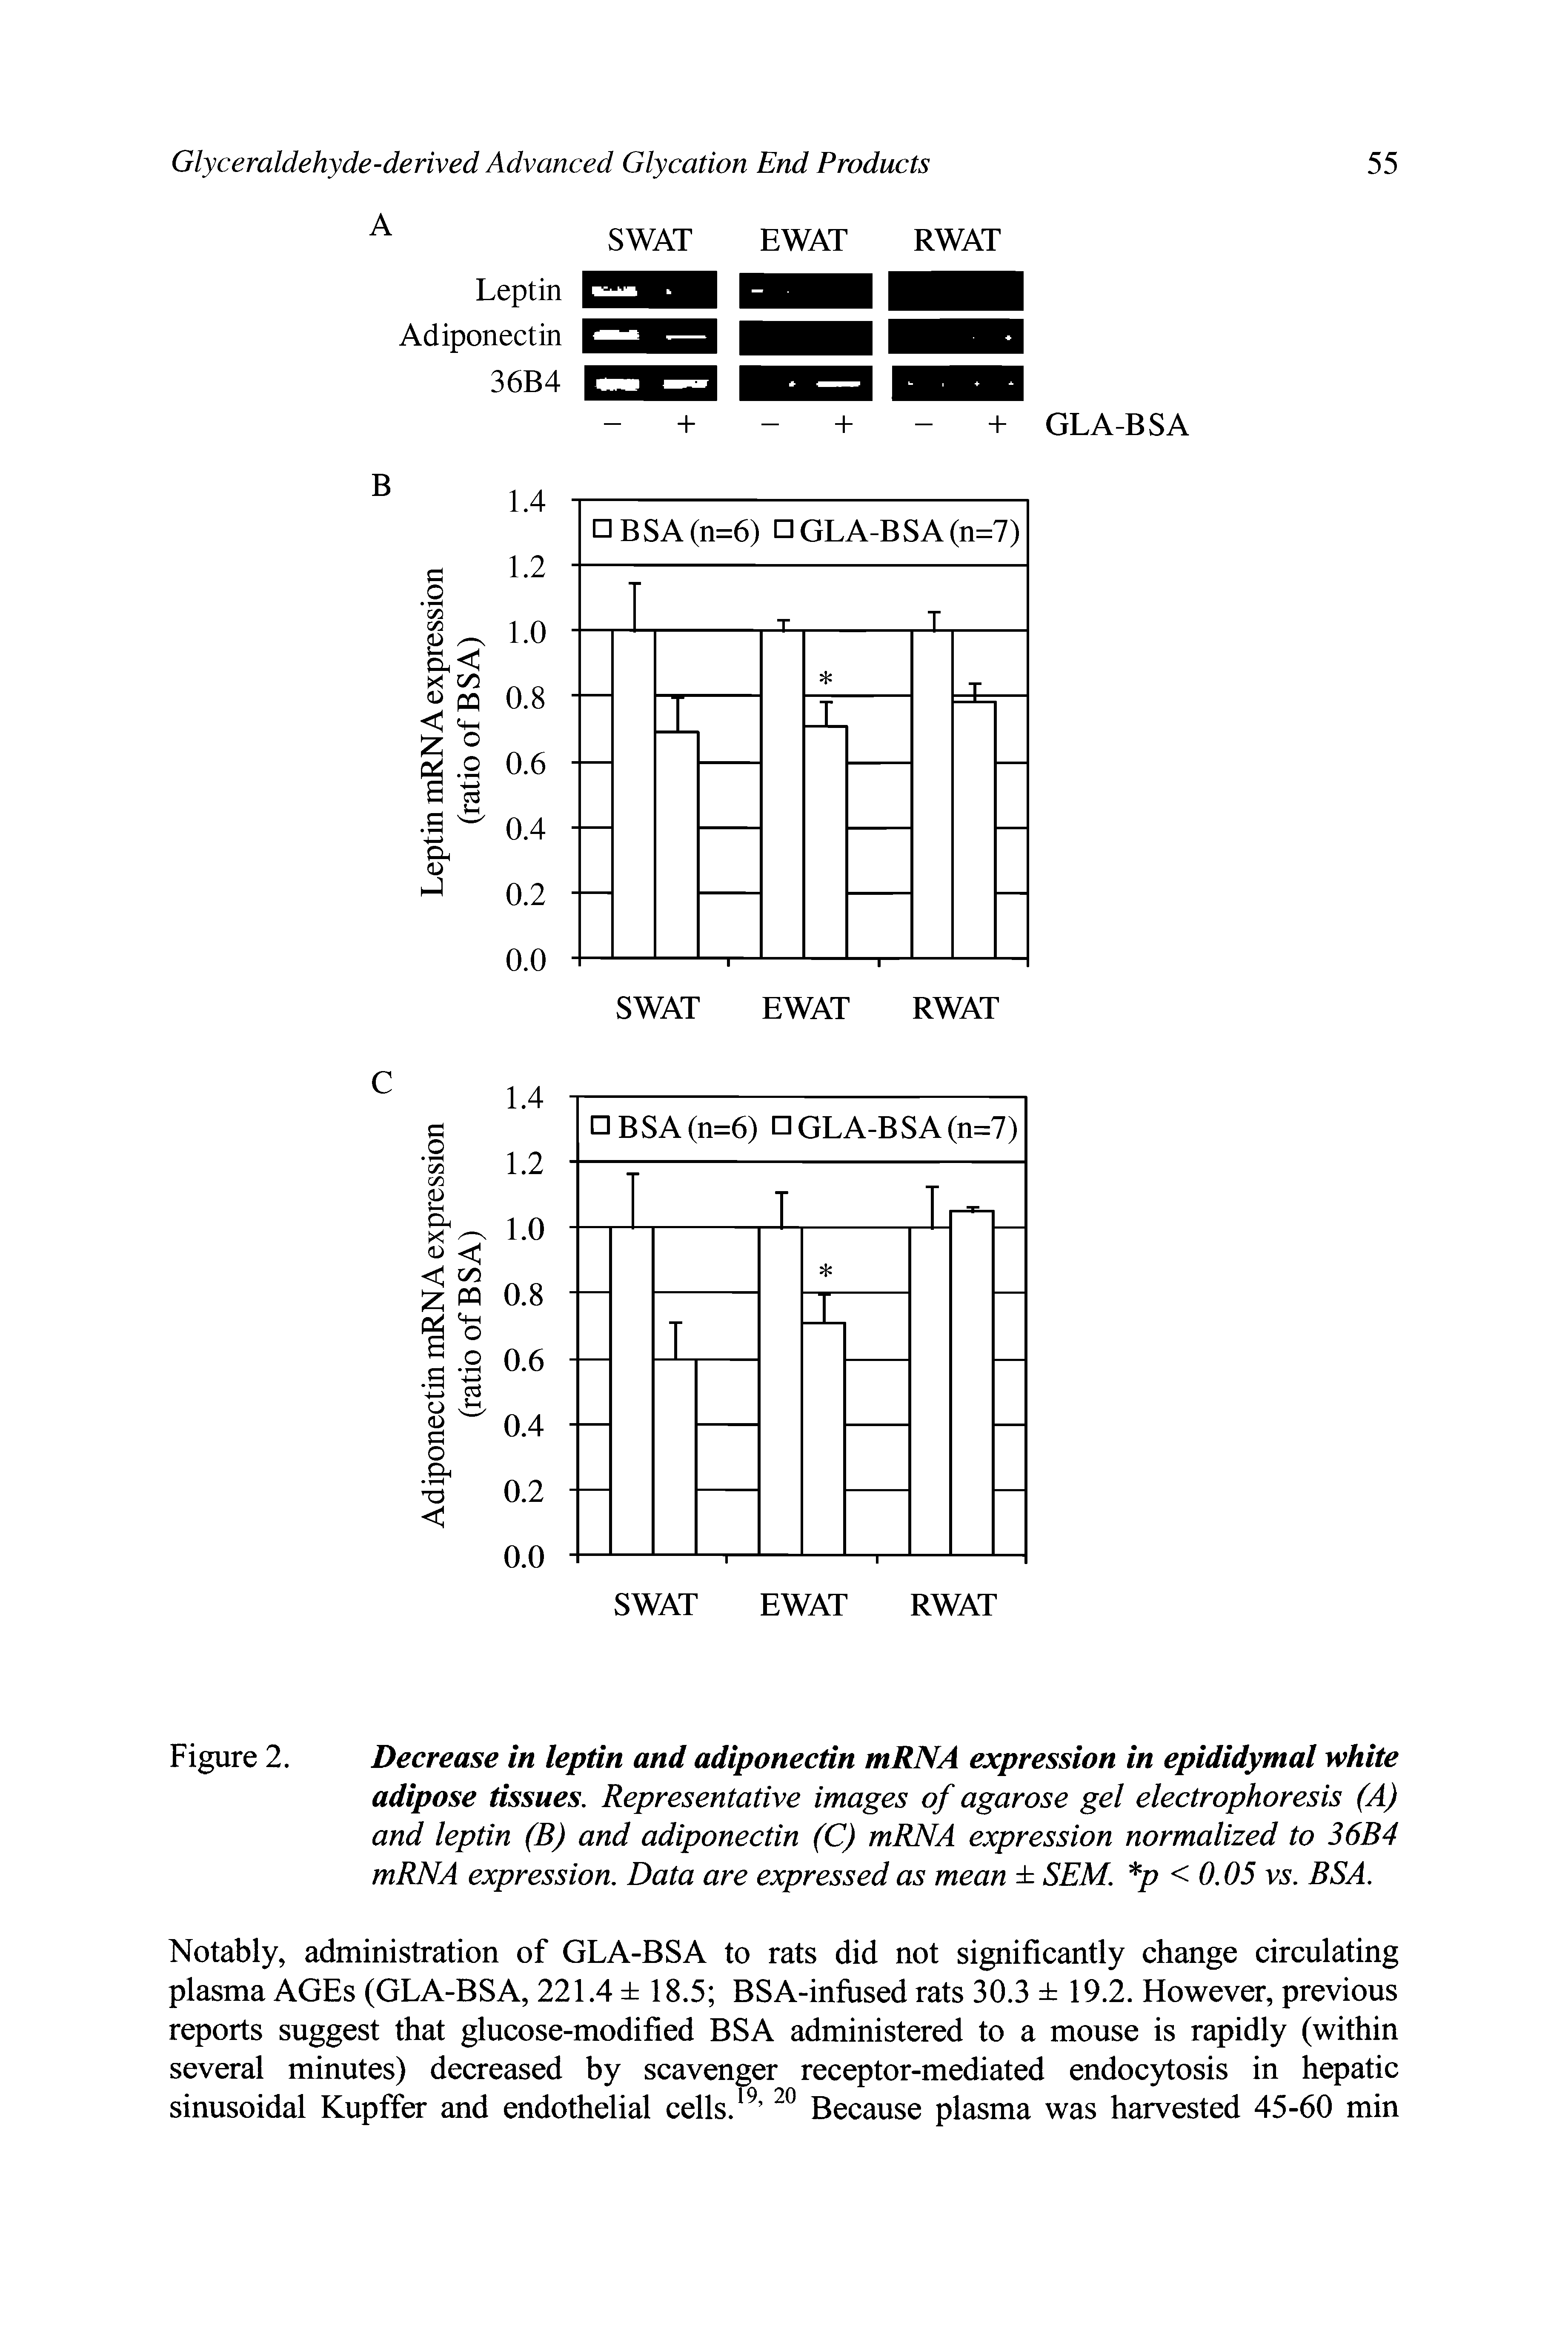 Figure 2. Decrease in leptin and adiponectin mRNA expression in epididymal white adipose tissues. Representative images of agarose gel electrophoresis (A) and leptin (B) and adiponectin (C) mRNA expression normalized to 36B4 mRNA expression. Data are expressed as mean SEM. p < 0.05 V5. BSA.